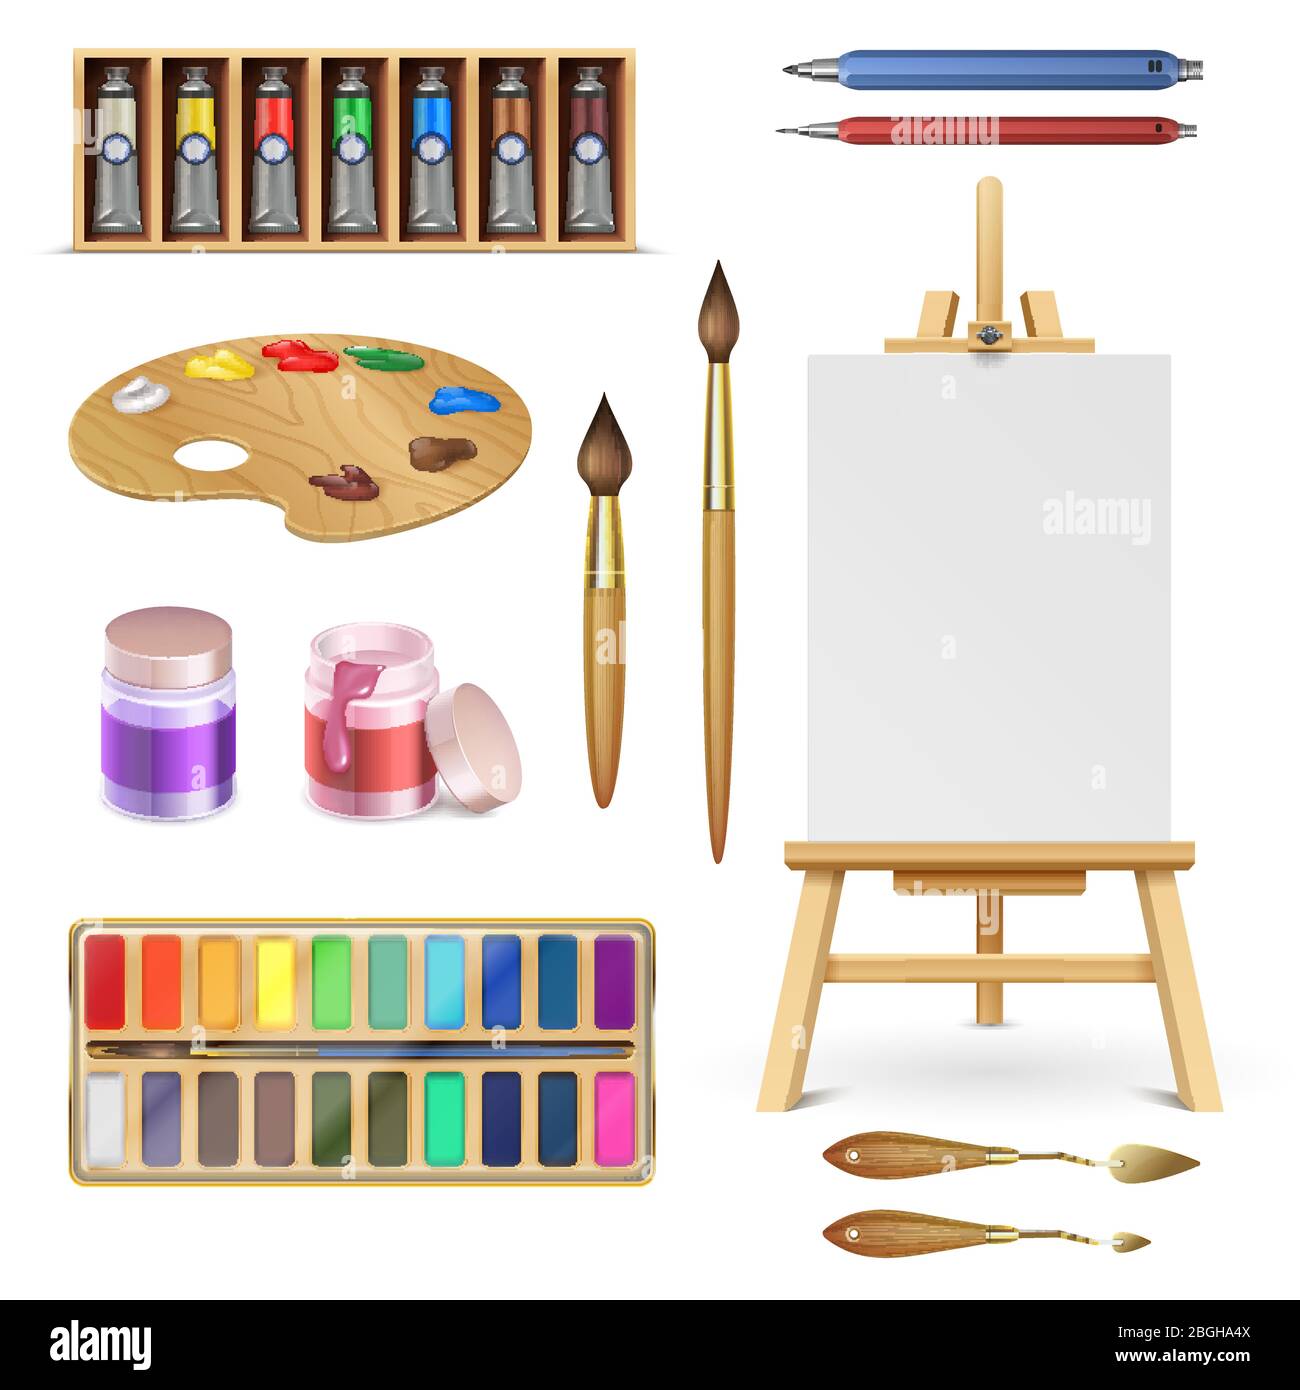 https://c8.alamy.com/comp/2BGHA4X/artistic-tools-and-art-supplies-with-easel-palette-paints-brush-and-color-pencil-isolated-vector-set-palette-drawing-easel-paint-supplies-brush-and-pencil-equipment-for-artistic-illustration-2BGHA4X.jpg